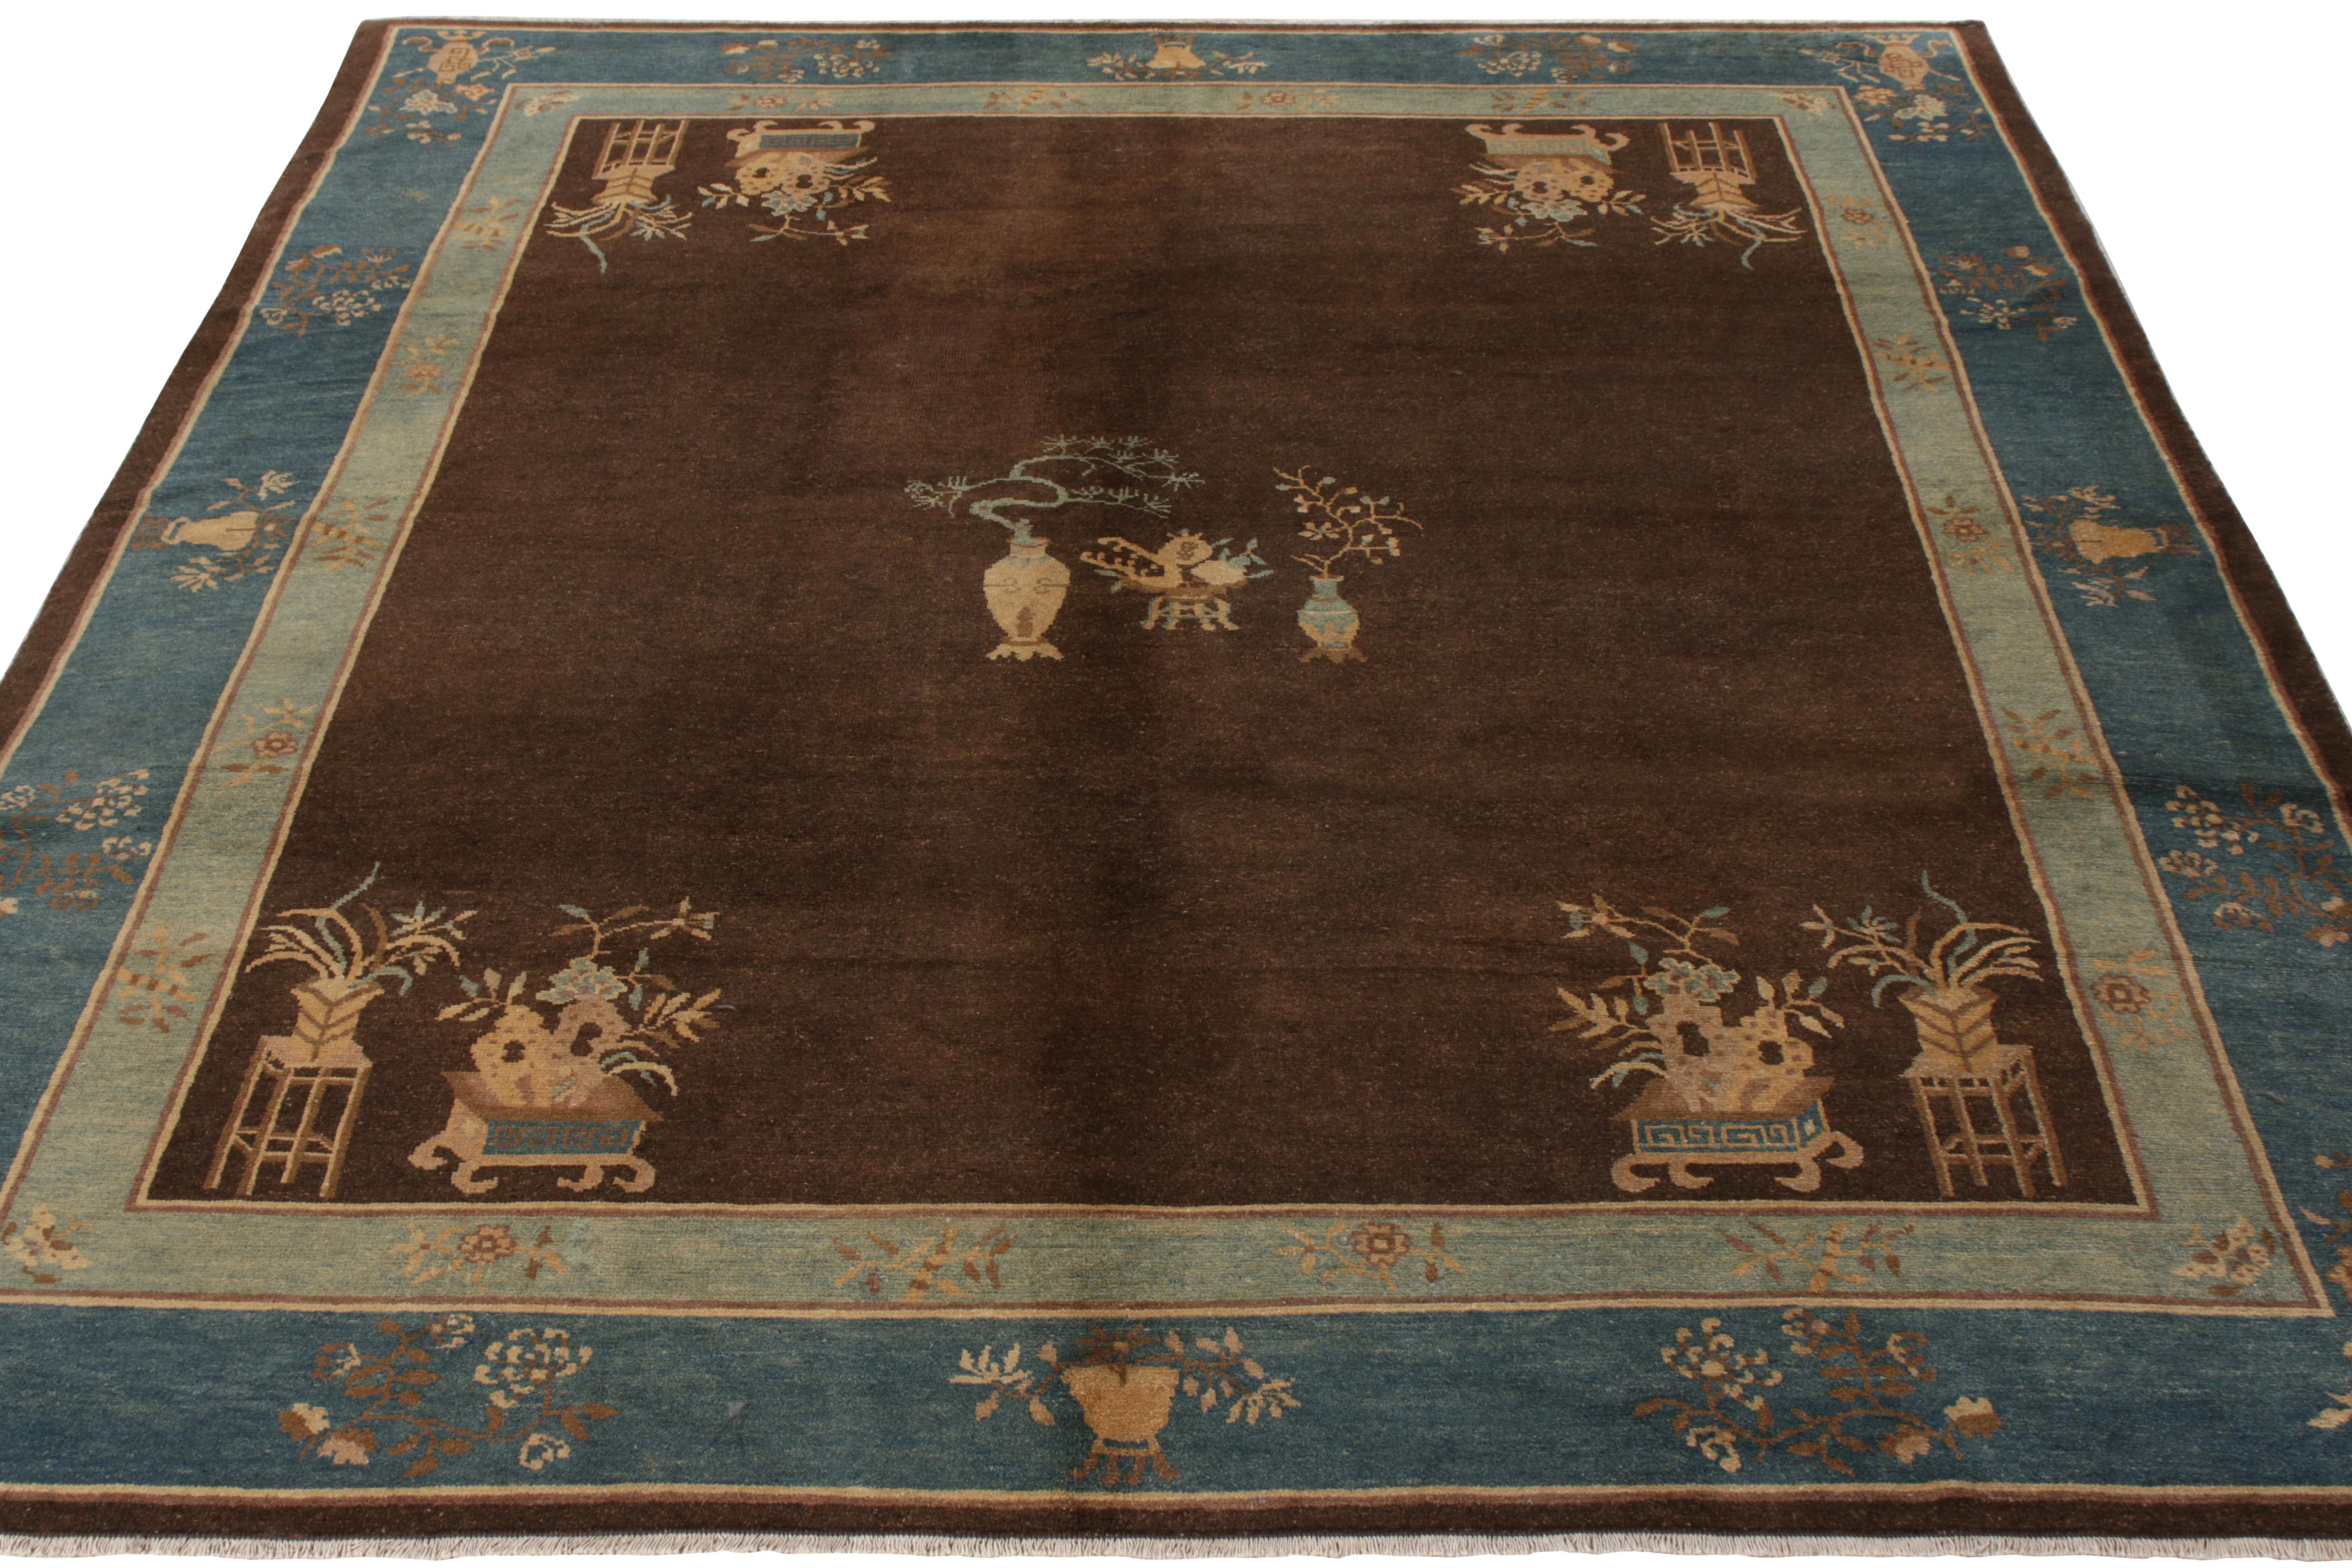 An antique Peking rug originating from China circa 1920-1930. Hand-knotted wool, the 8x9 rug exhibits exemplary Chinese Deco sensibilities with a pervasive pictorial floral pattern that features flower vases as a central medallion and on the borders